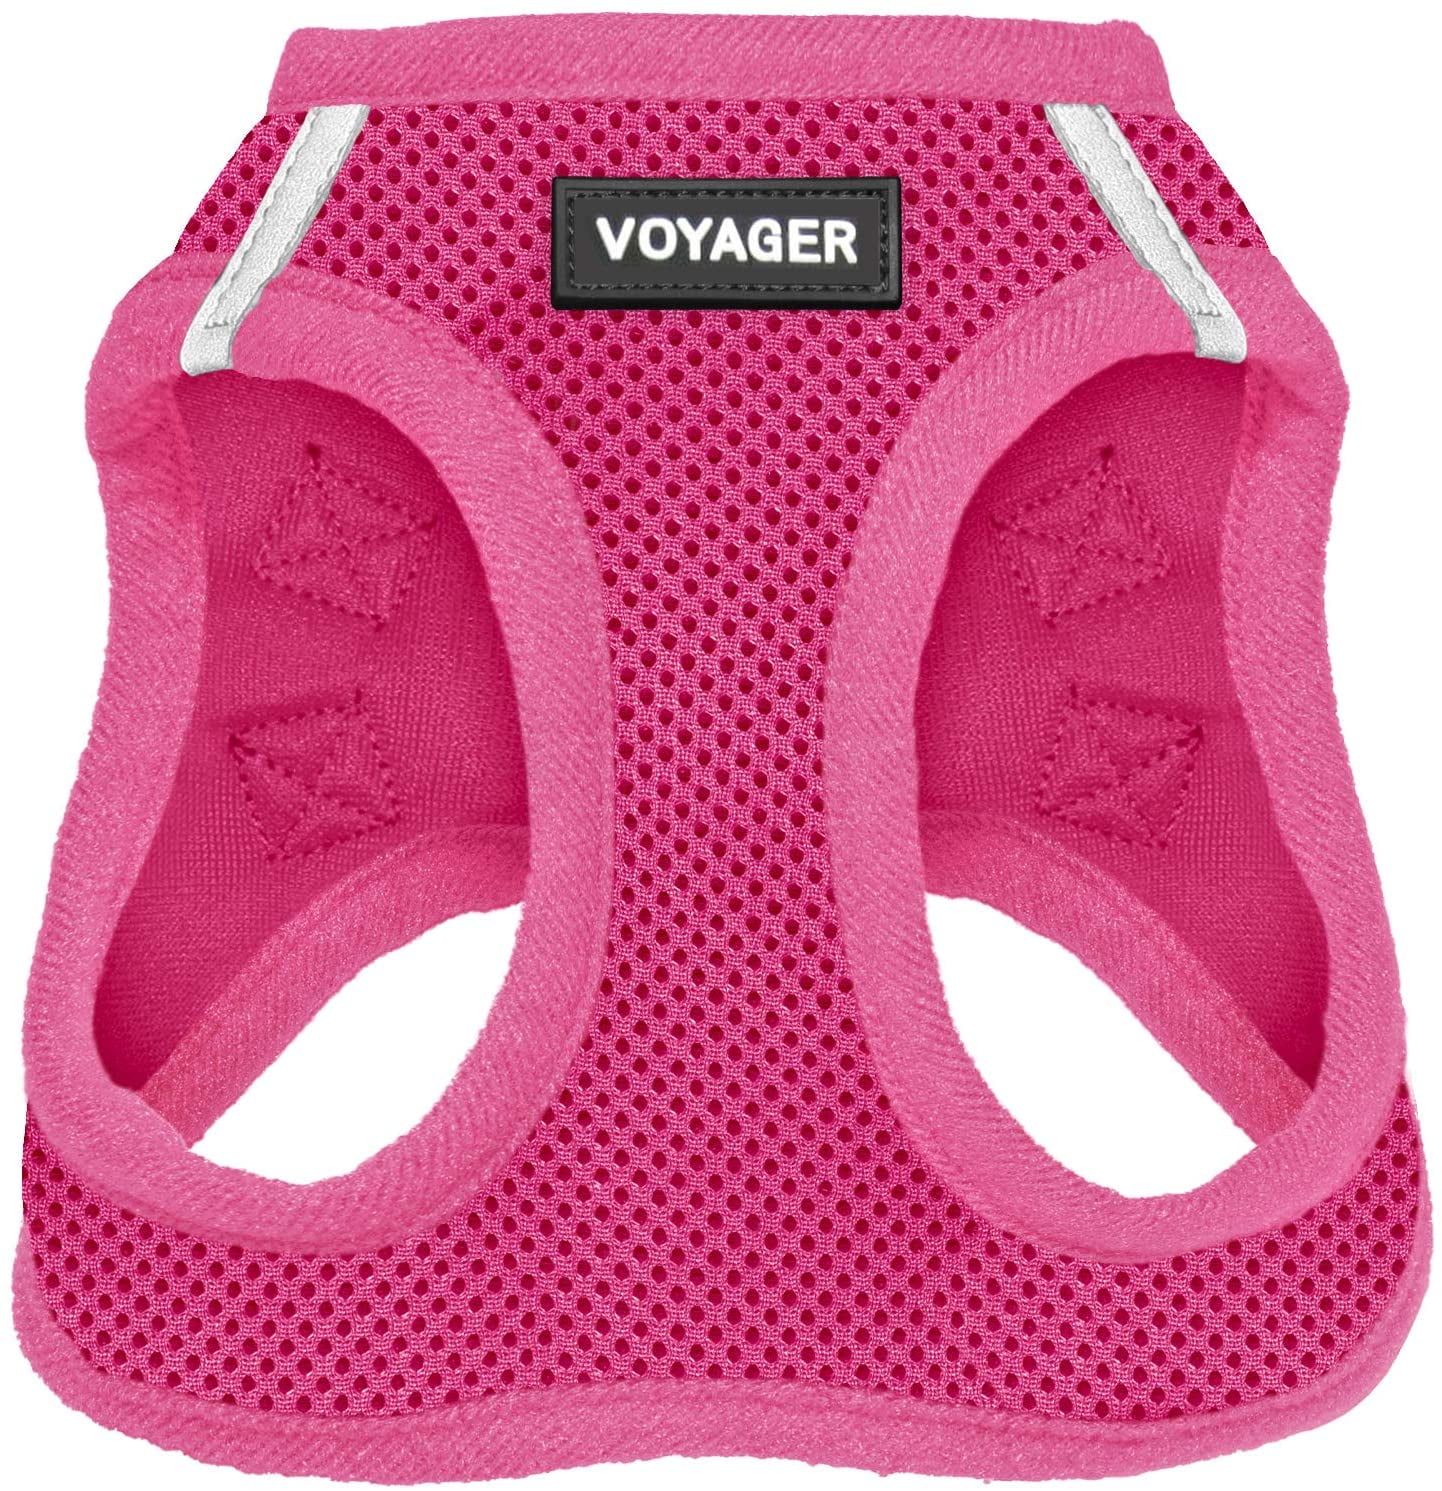 Voyager Step-In Air Dog Harness Step In Vest Harness for Small and Medium Dogs by Best Pet Supplies All Weather Mesh